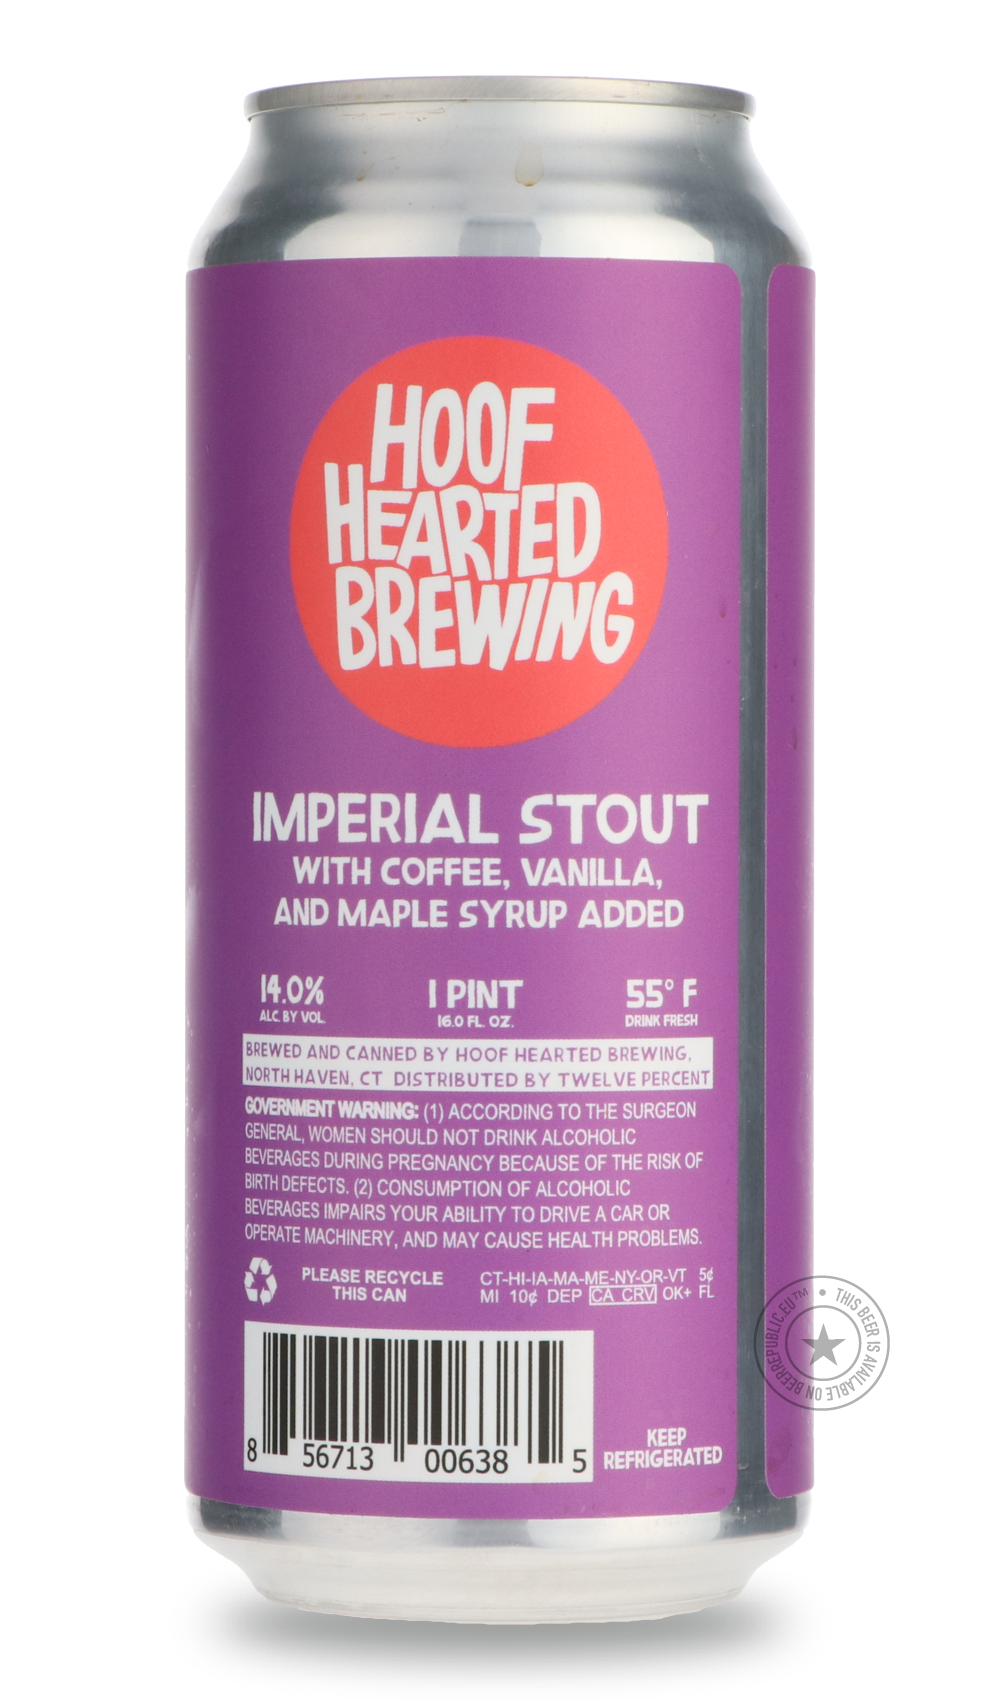 -Hoof Hearted- Fitness Freak-Stout & Porter- Only @ Beer Republic - The best online beer store for American & Canadian craft beer - Buy beer online from the USA and Canada - Bier online kopen - Amerikaans bier kopen - Craft beer store - Craft beer kopen - Amerikanisch bier kaufen - Bier online kaufen - Acheter biere online - IPA - Stout - Porter - New England IPA - Hazy IPA - Imperial Stout - Barrel Aged - Barrel Aged Imperial Stout - Brown - Dark beer - Blond - Blonde - Pilsner - Lager - Wheat - Weizen - A